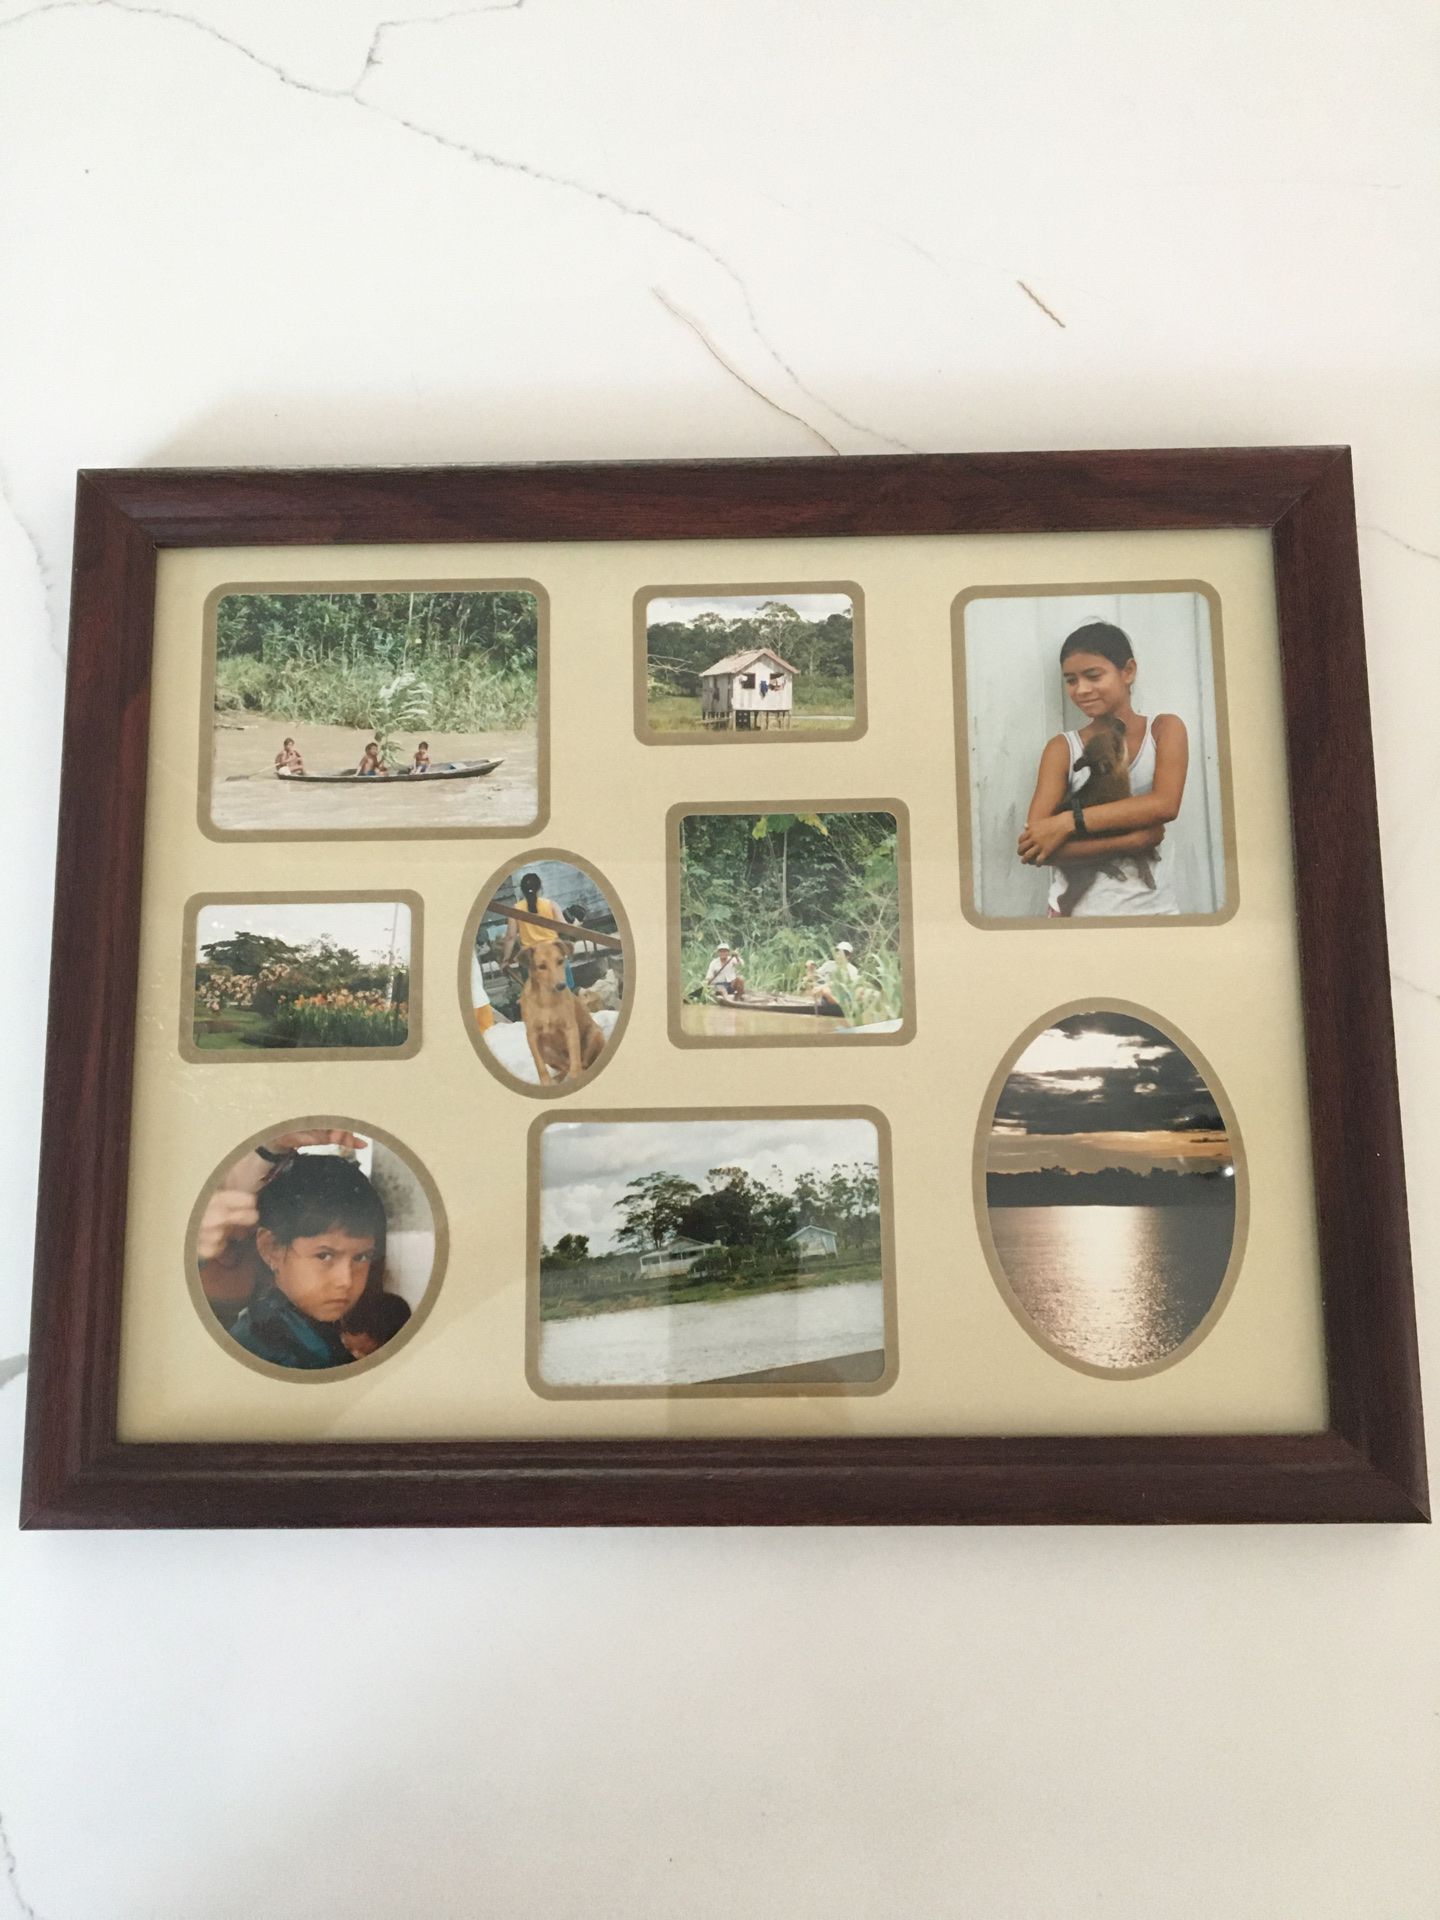 15 1/2” x 12 1/2” Wood Collage Photo Frame